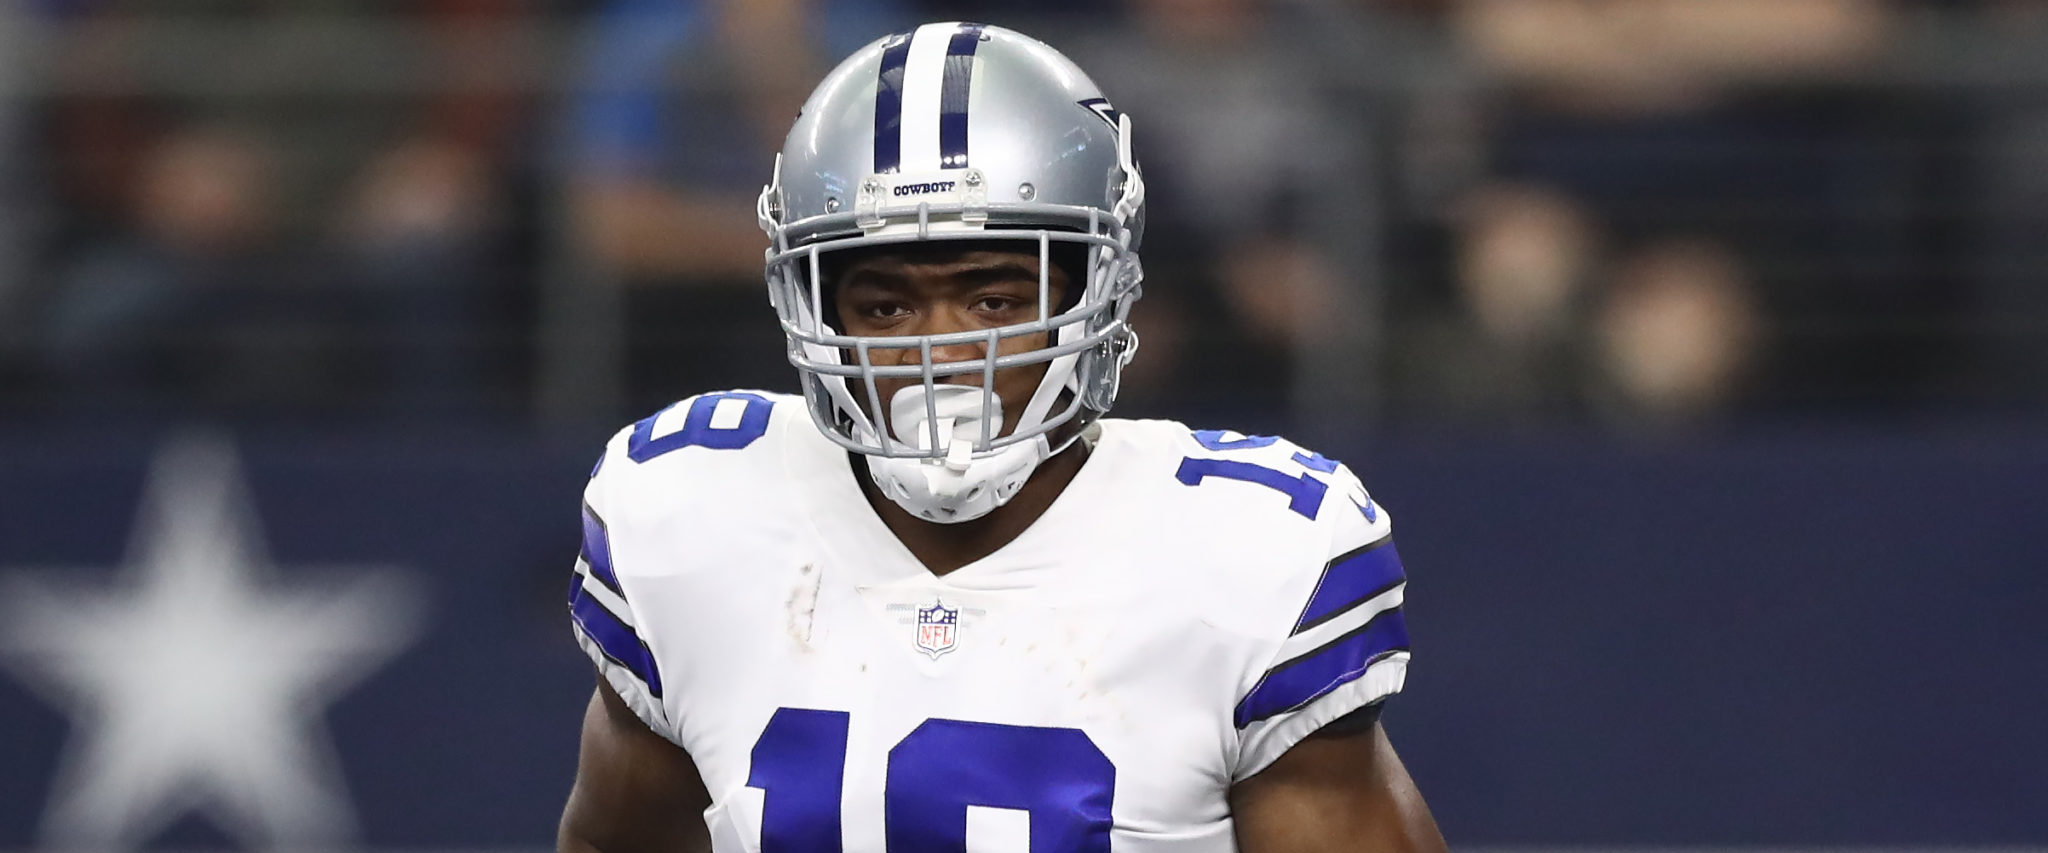 Cowboys likely to release wide receiver Cooper